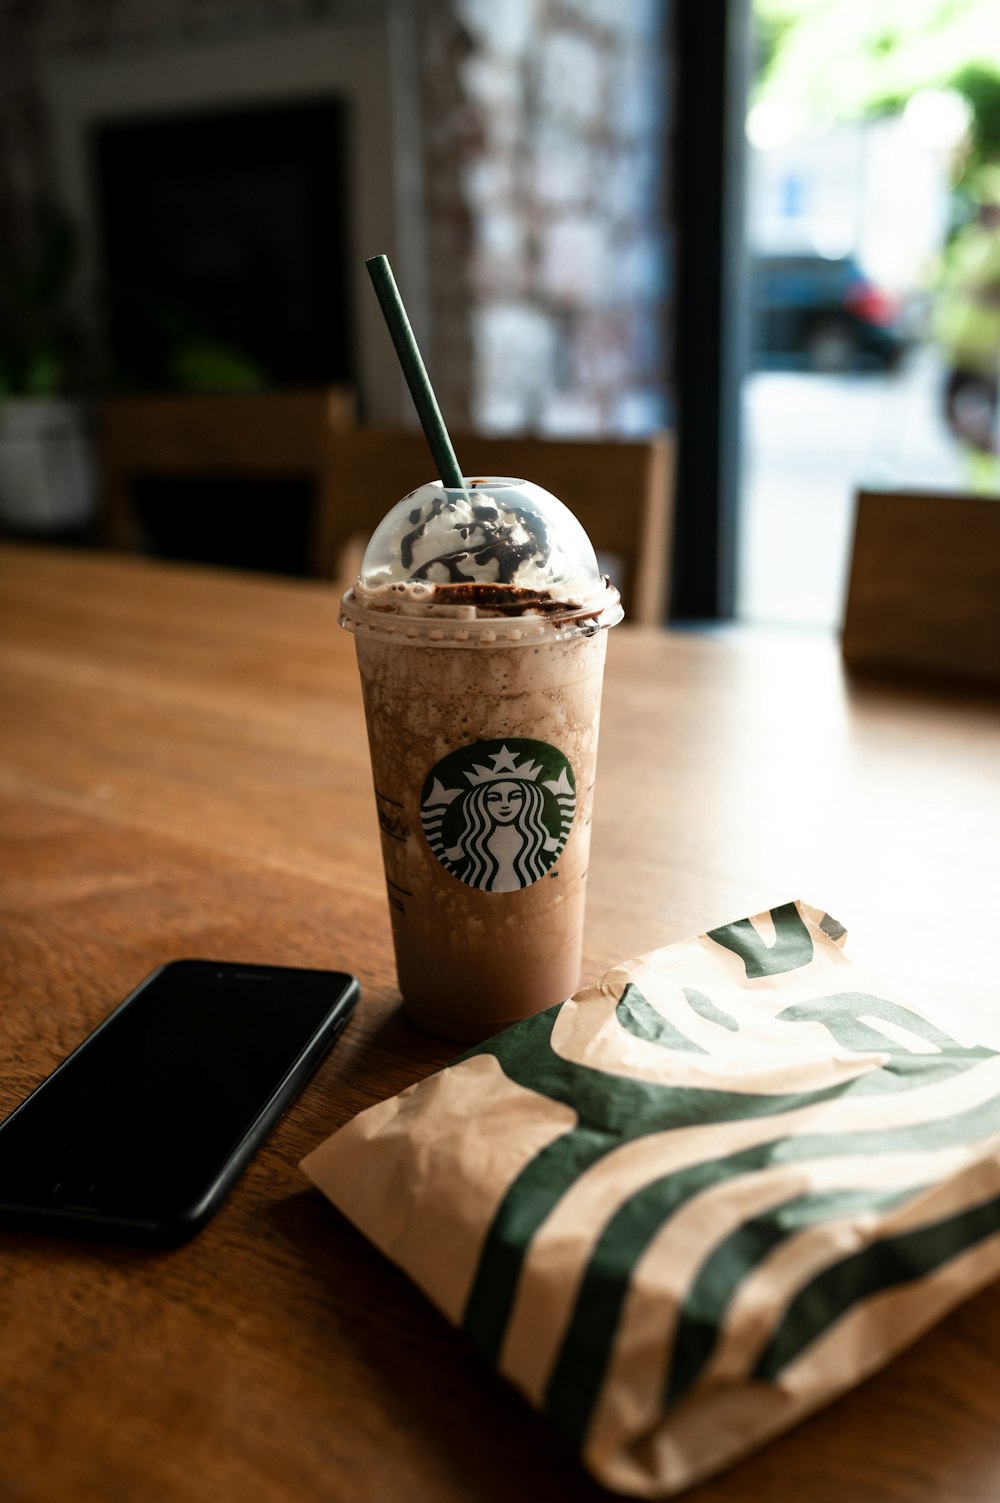 brown and white starbucks cup beside black smartphone on brown wooden table